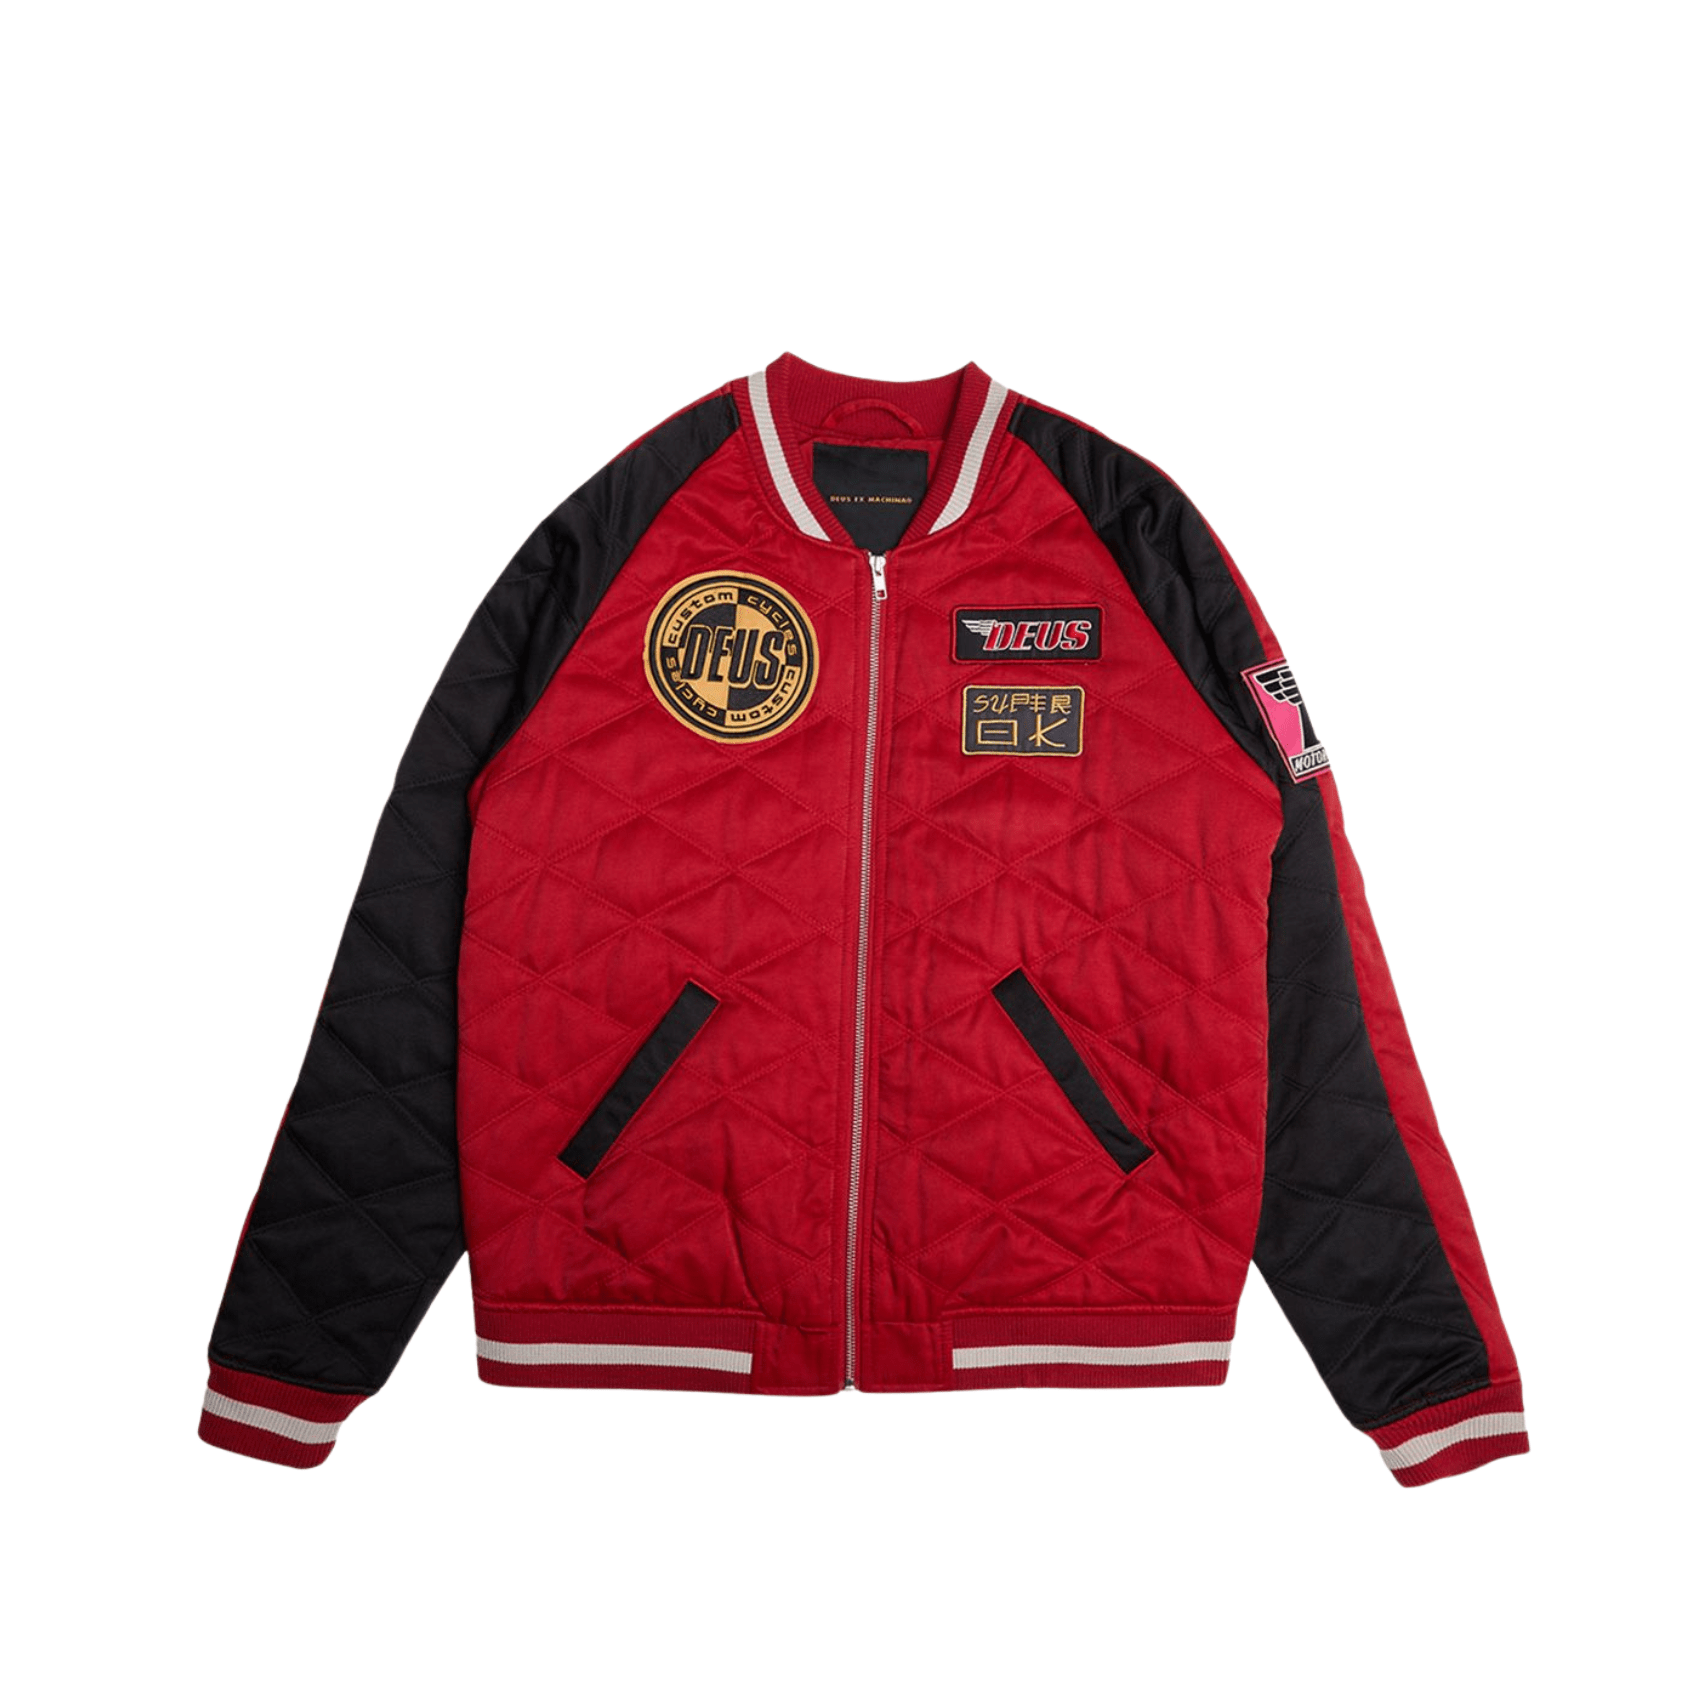 Supporters Jacket - Red/Black